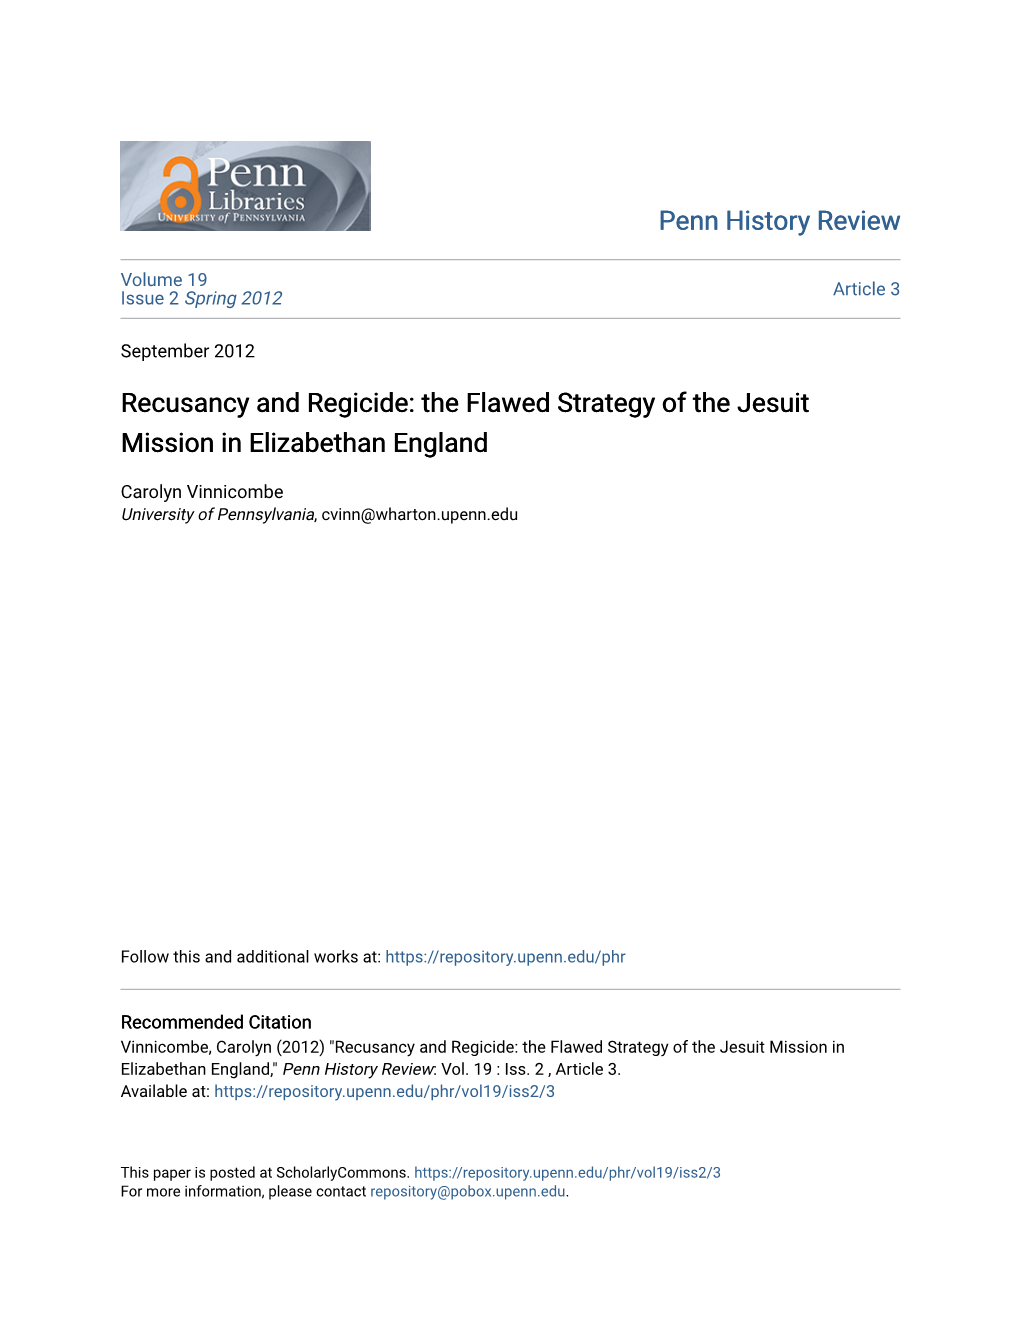 Recusancy and Regicide: the Flawed Strategy of the Jesuit Mission in Elizabethan England